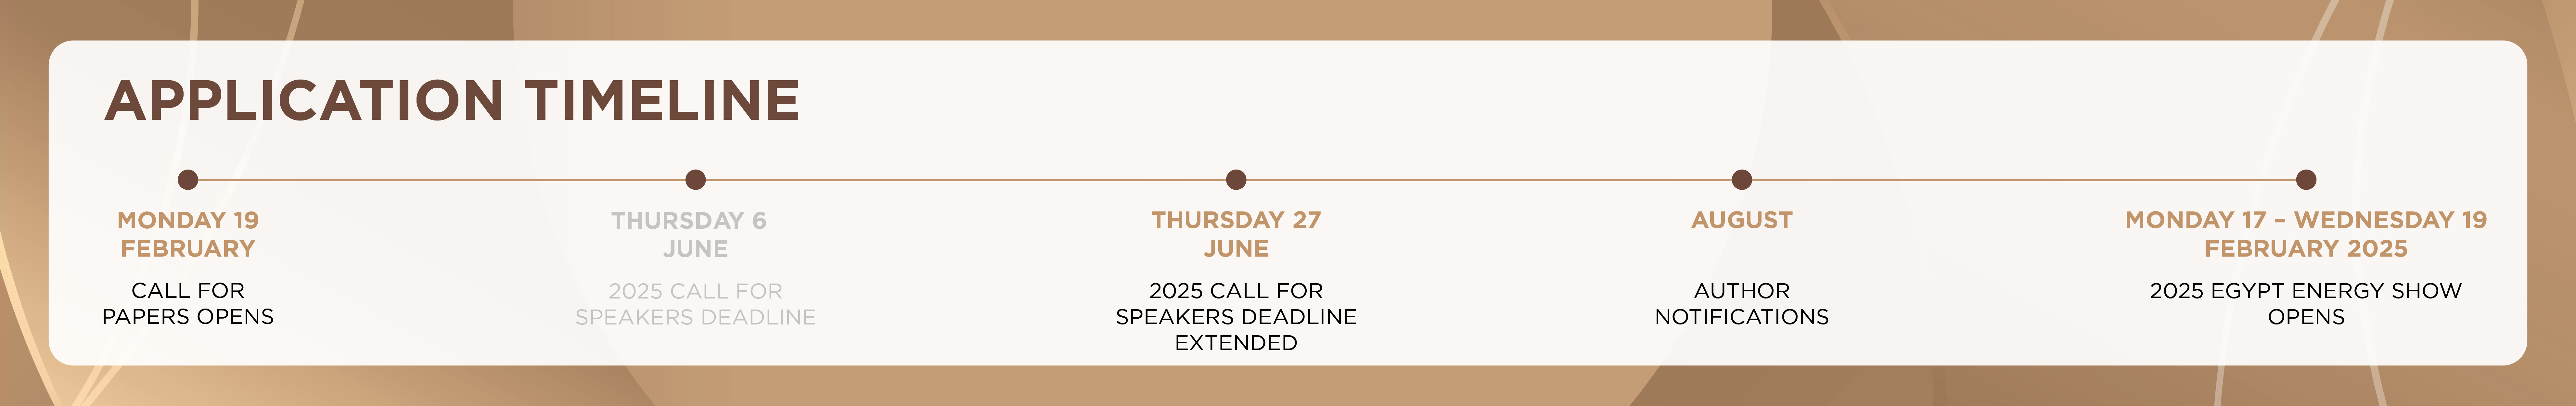 EGYPES2025 Call For Paper Application Timeline 1903X300 10Jun 2 (1)